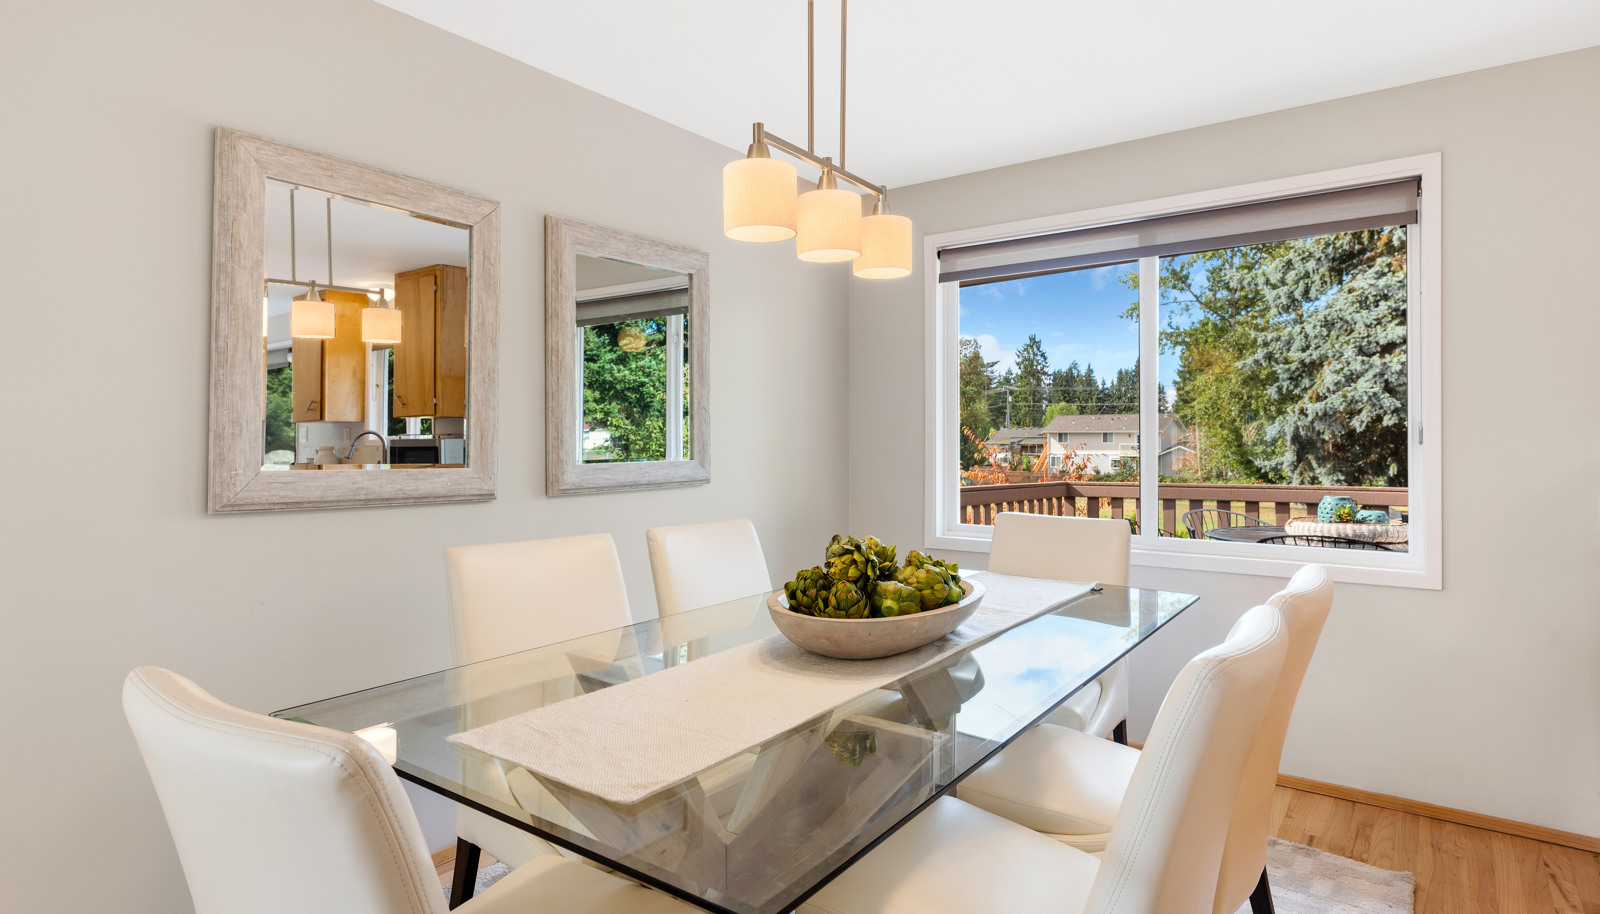 Dining area with window overlooking back yard and park.